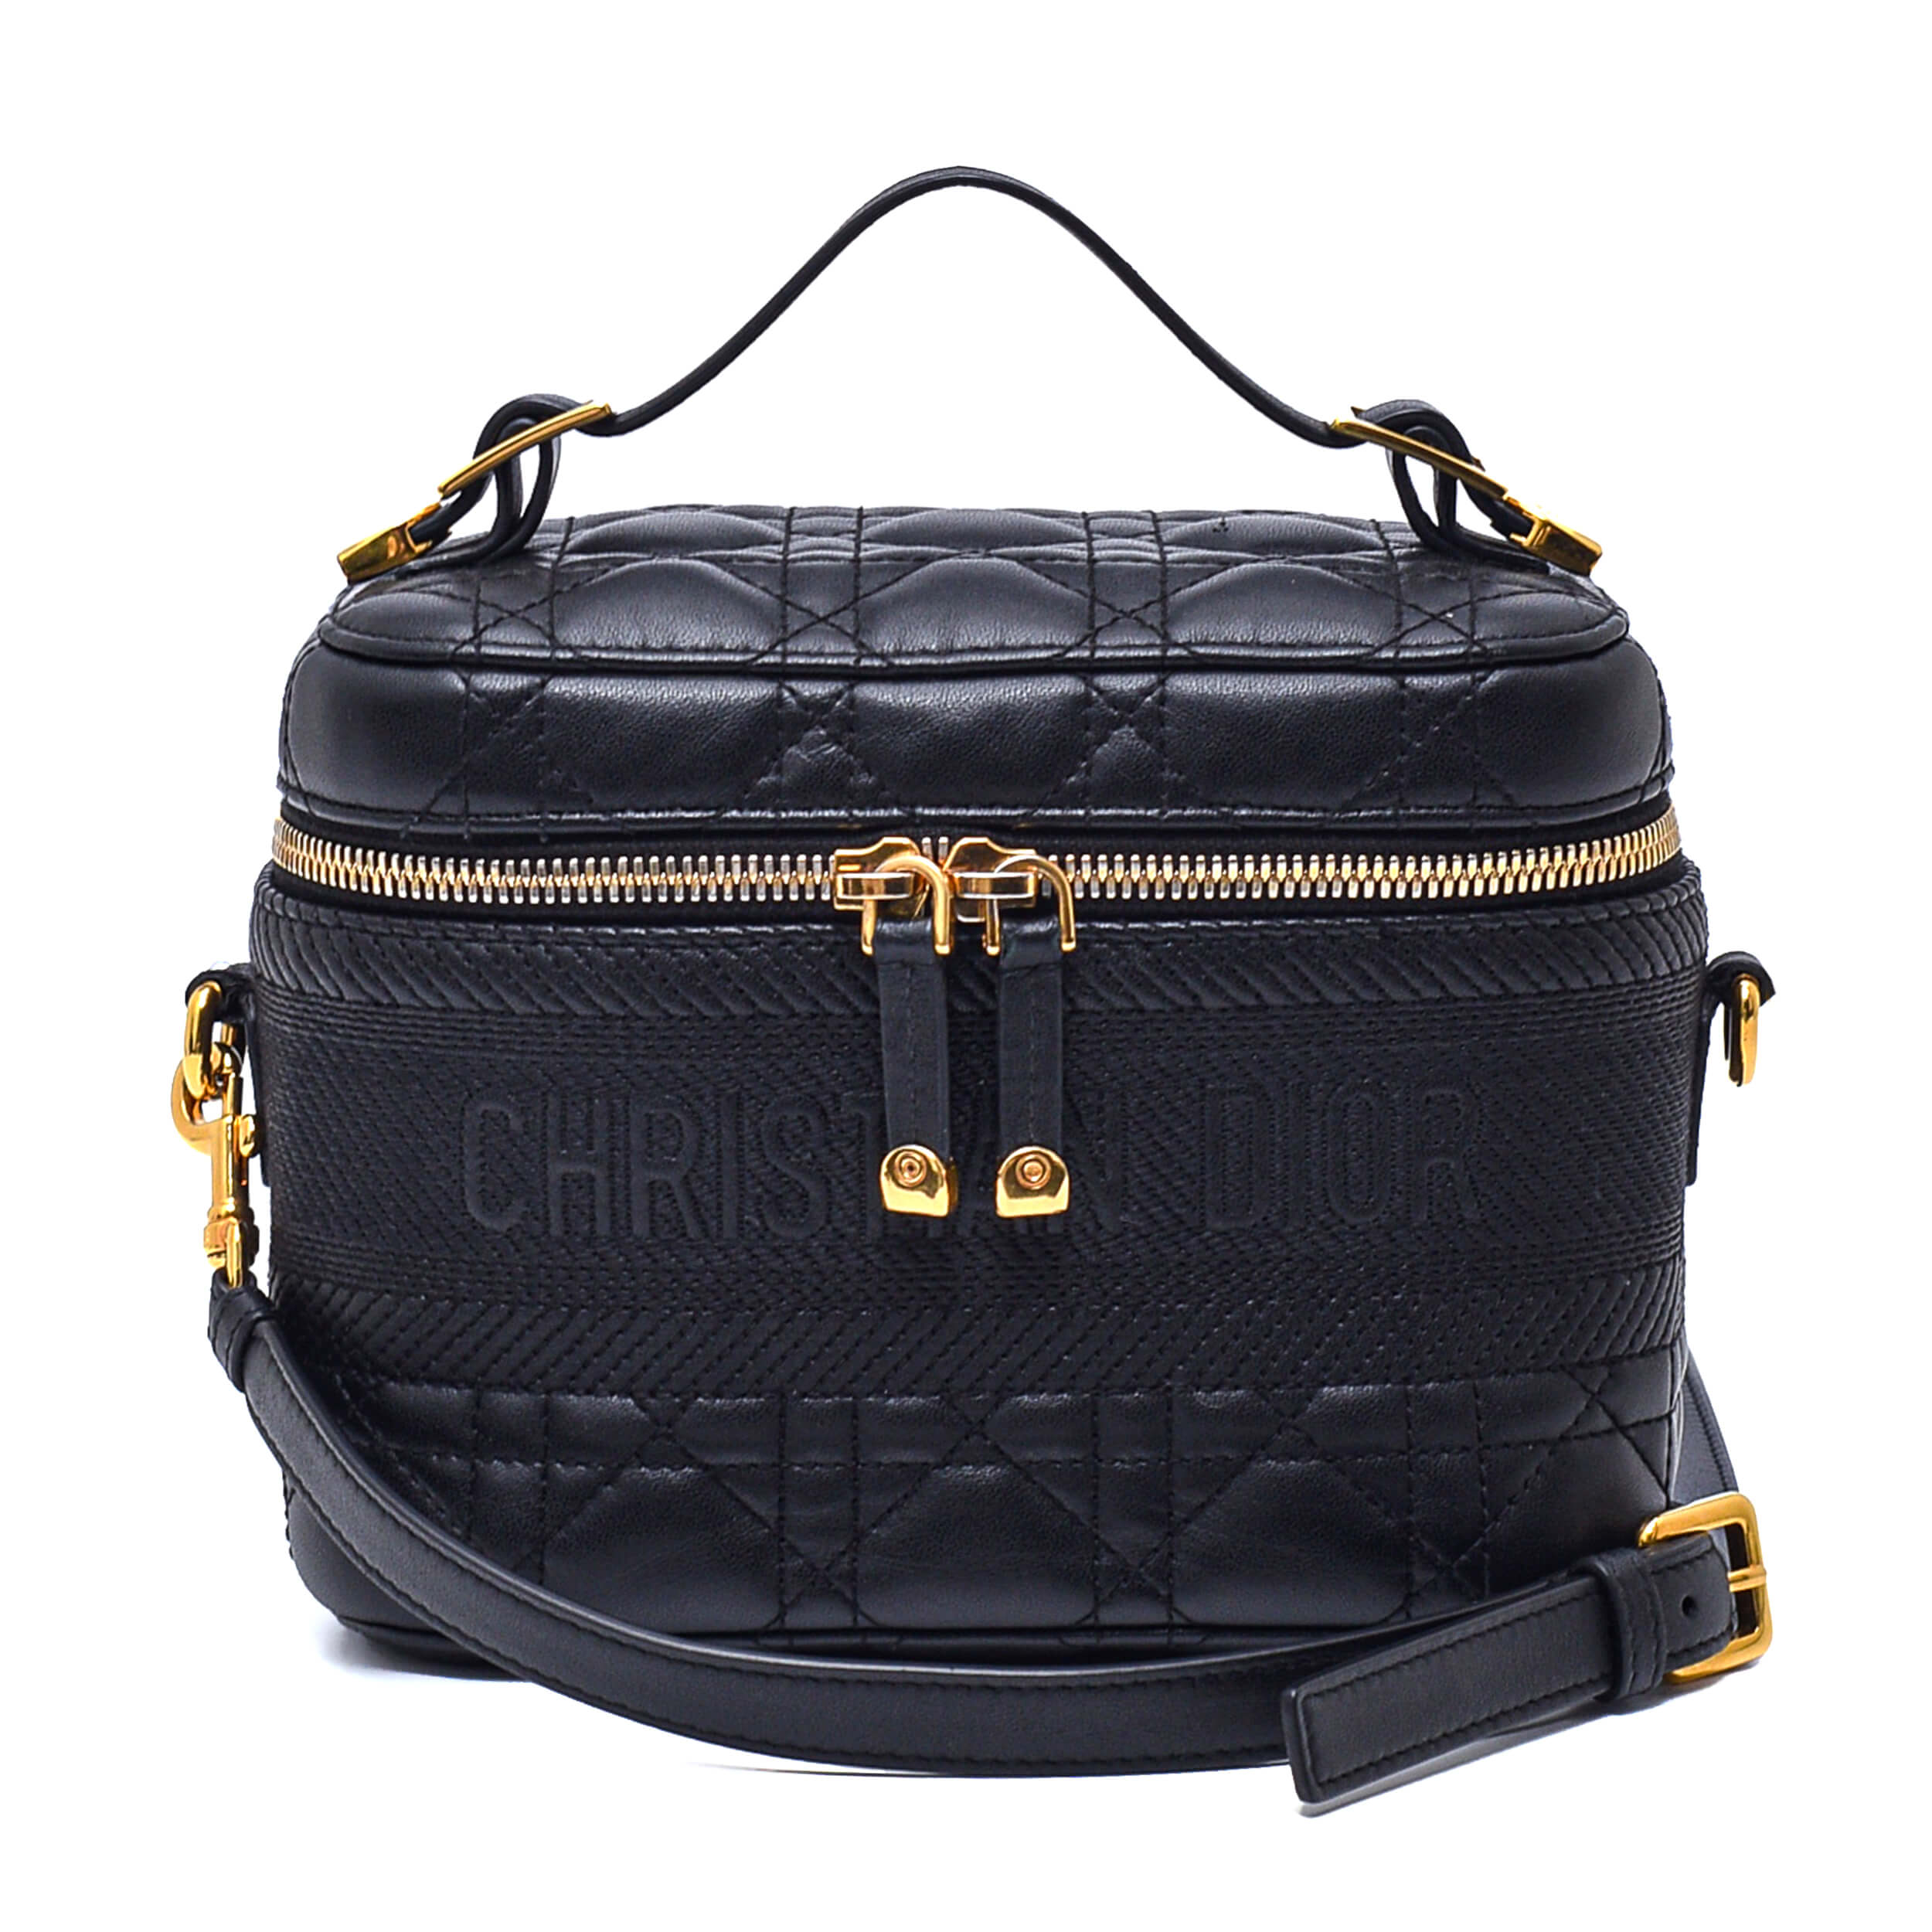 Christian Dior - Black Cannage Leather DiorTravel Vanity Case Small Bag